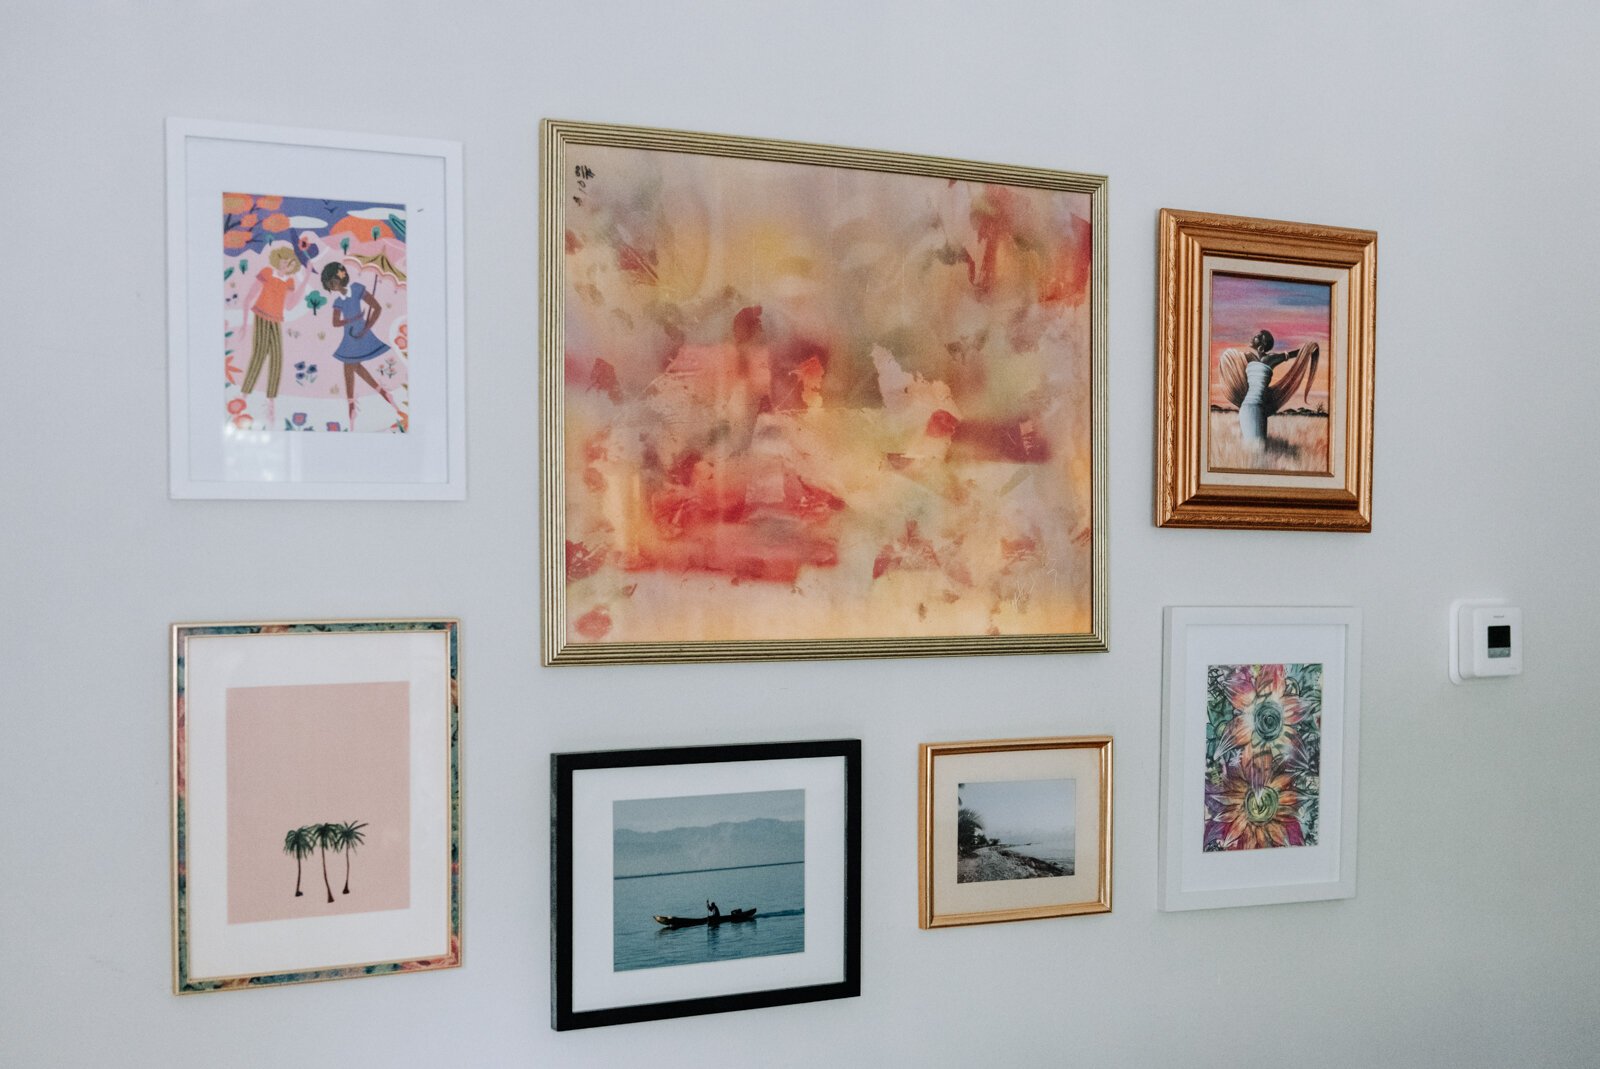 One of her favorite walls is dubbed the gallery wall and is filled with photos from travels and friends in the apartment of Jamie Curtis on Edgewater Ave.